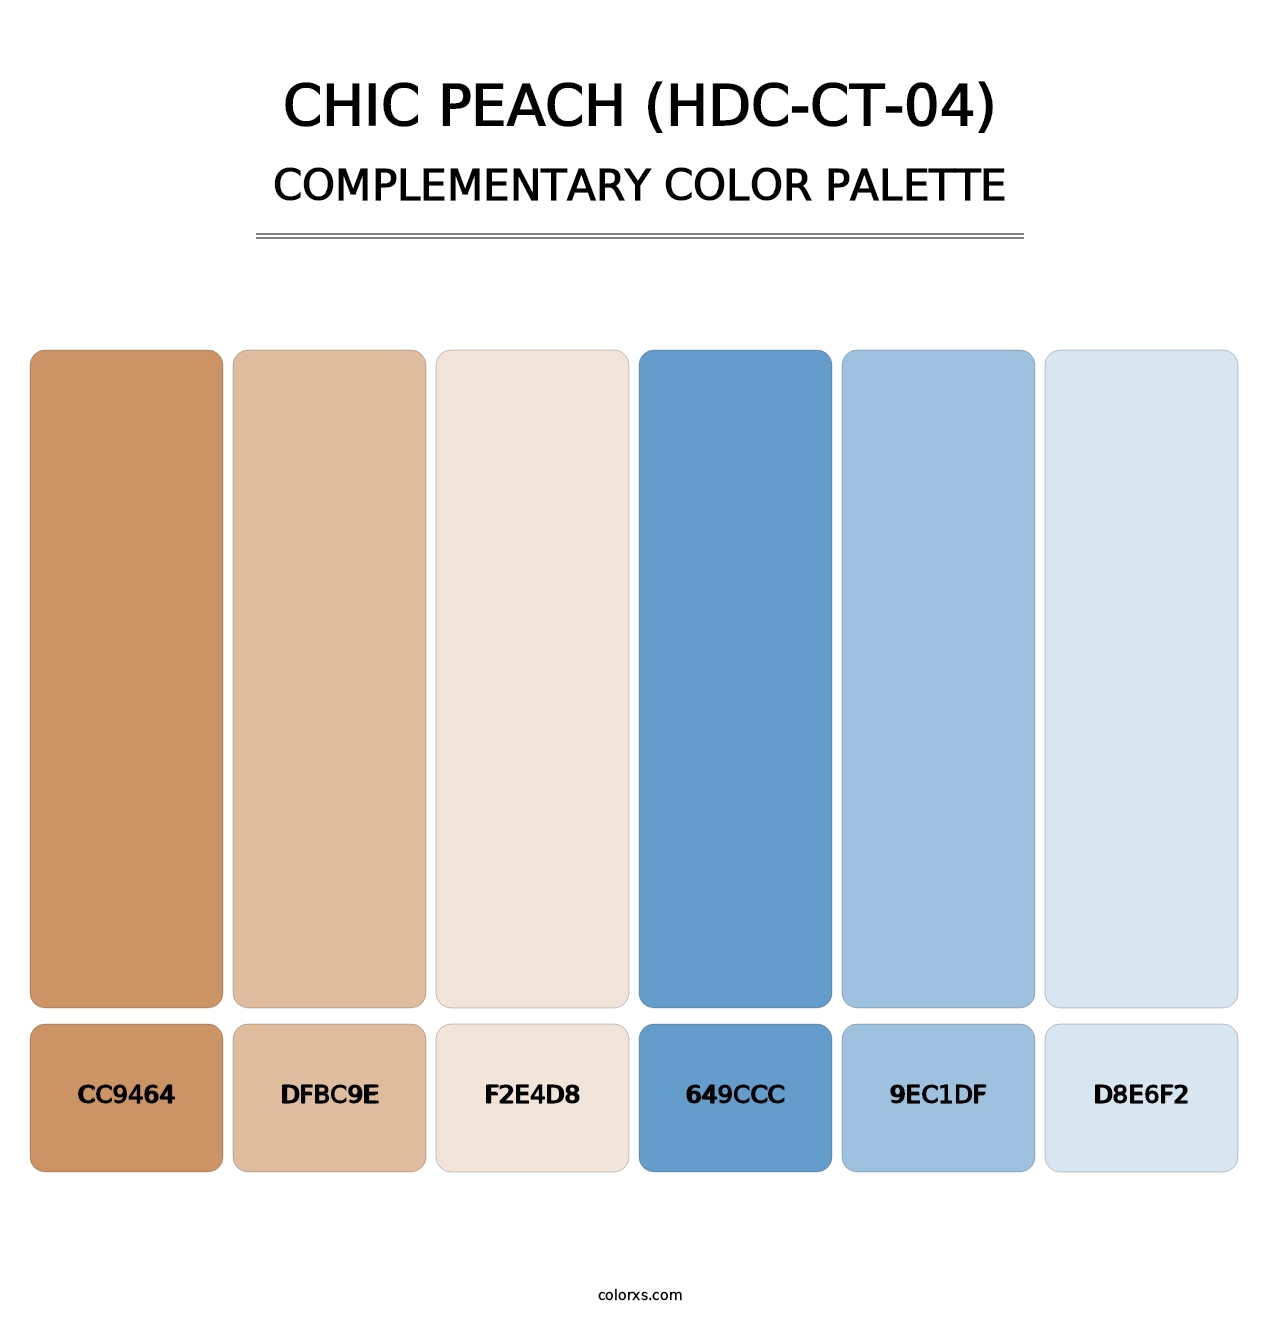 Chic Peach (HDC-CT-04) - Complementary Color Palette